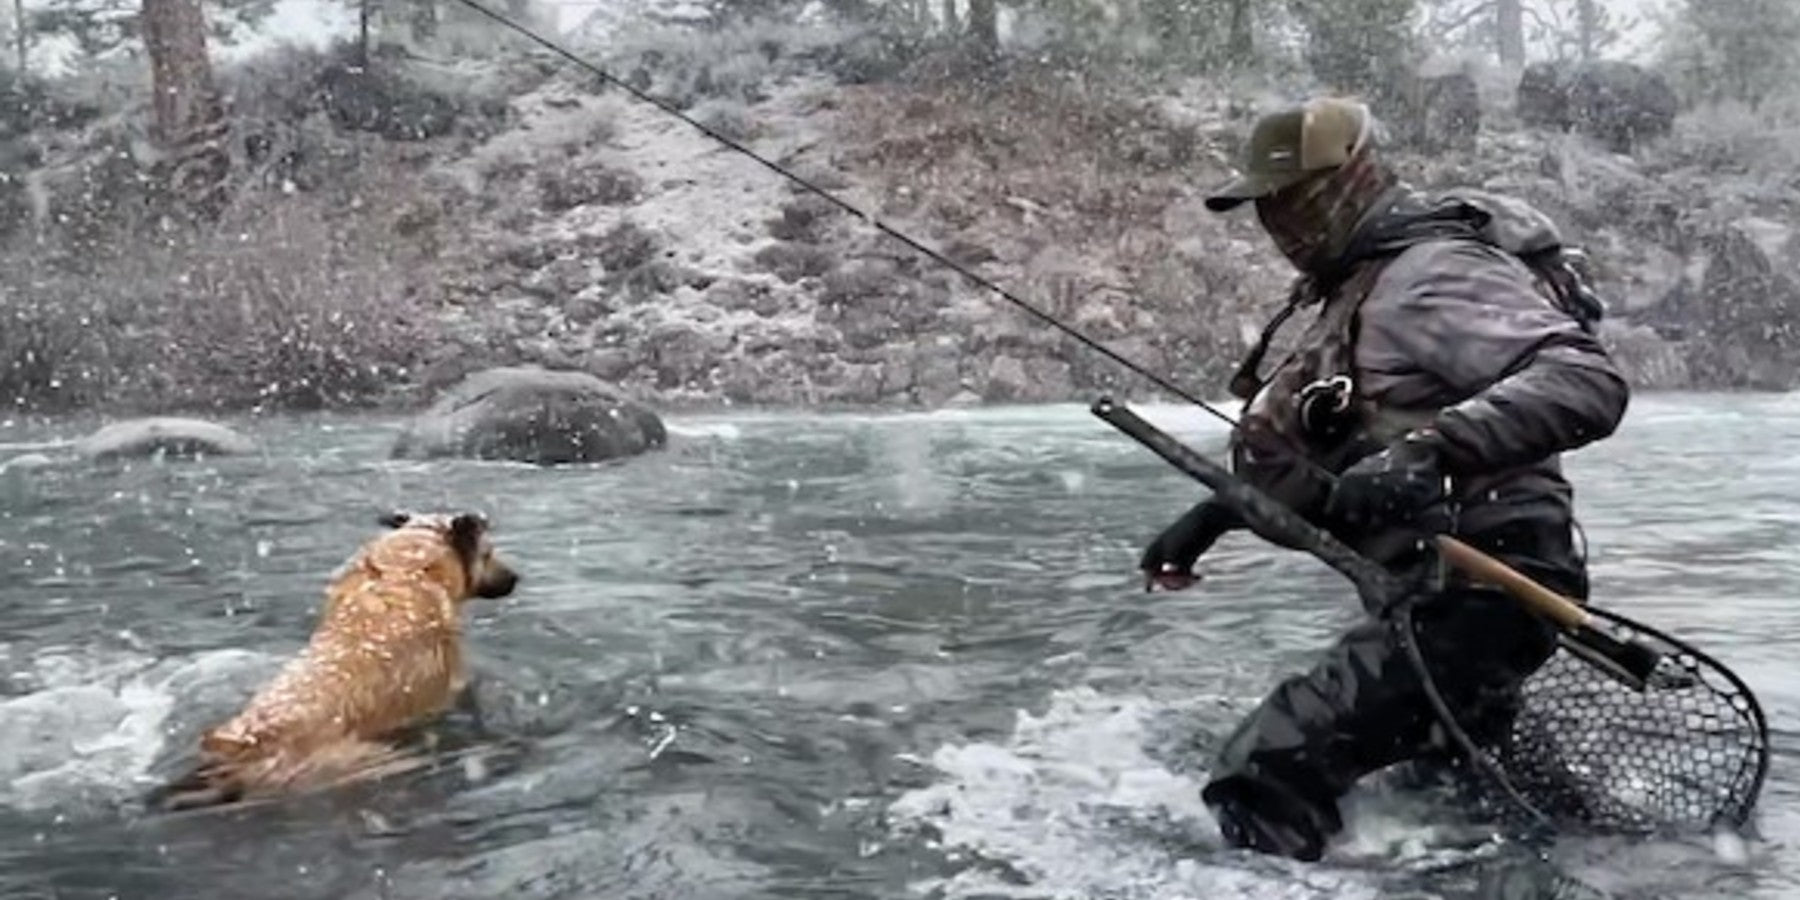 Success on the Fly Part 2 Jeff Sasaki and his four-legged pal, Winston the amazing k9, brave the snow to get in some casts on the Truckee River, photo courtesy Mavrk